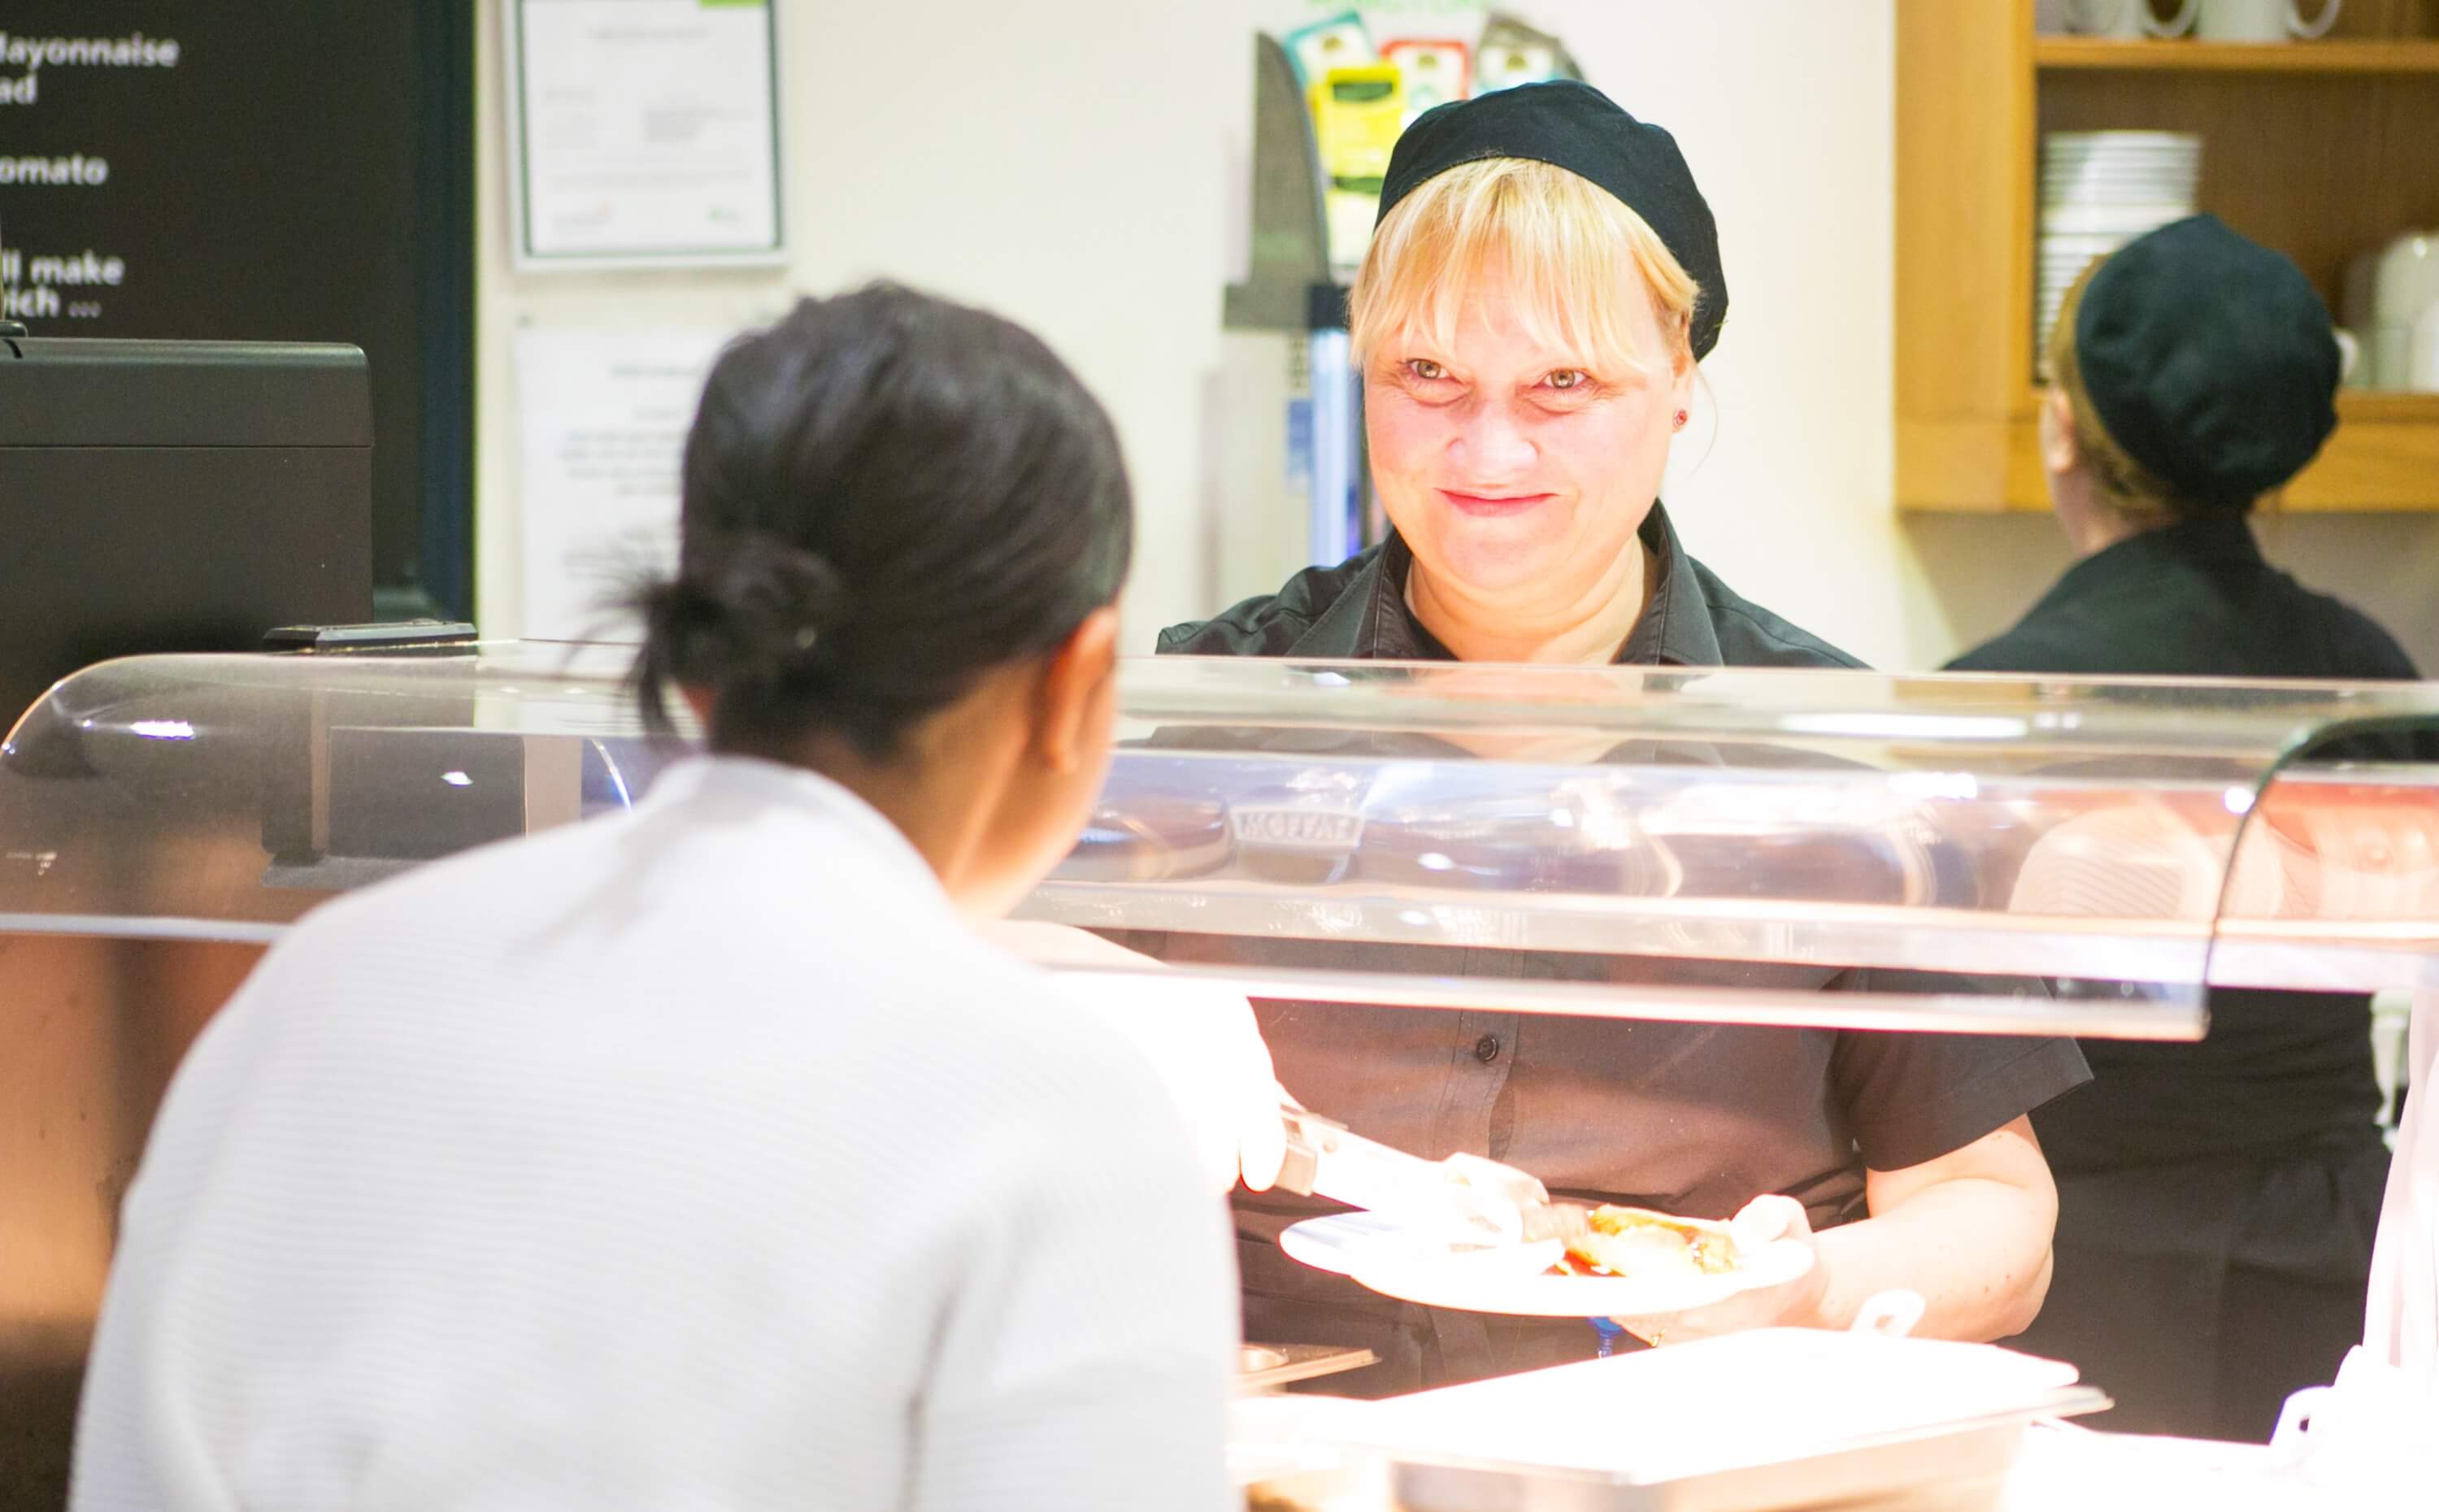 A female staff member serving food in a cafeteria